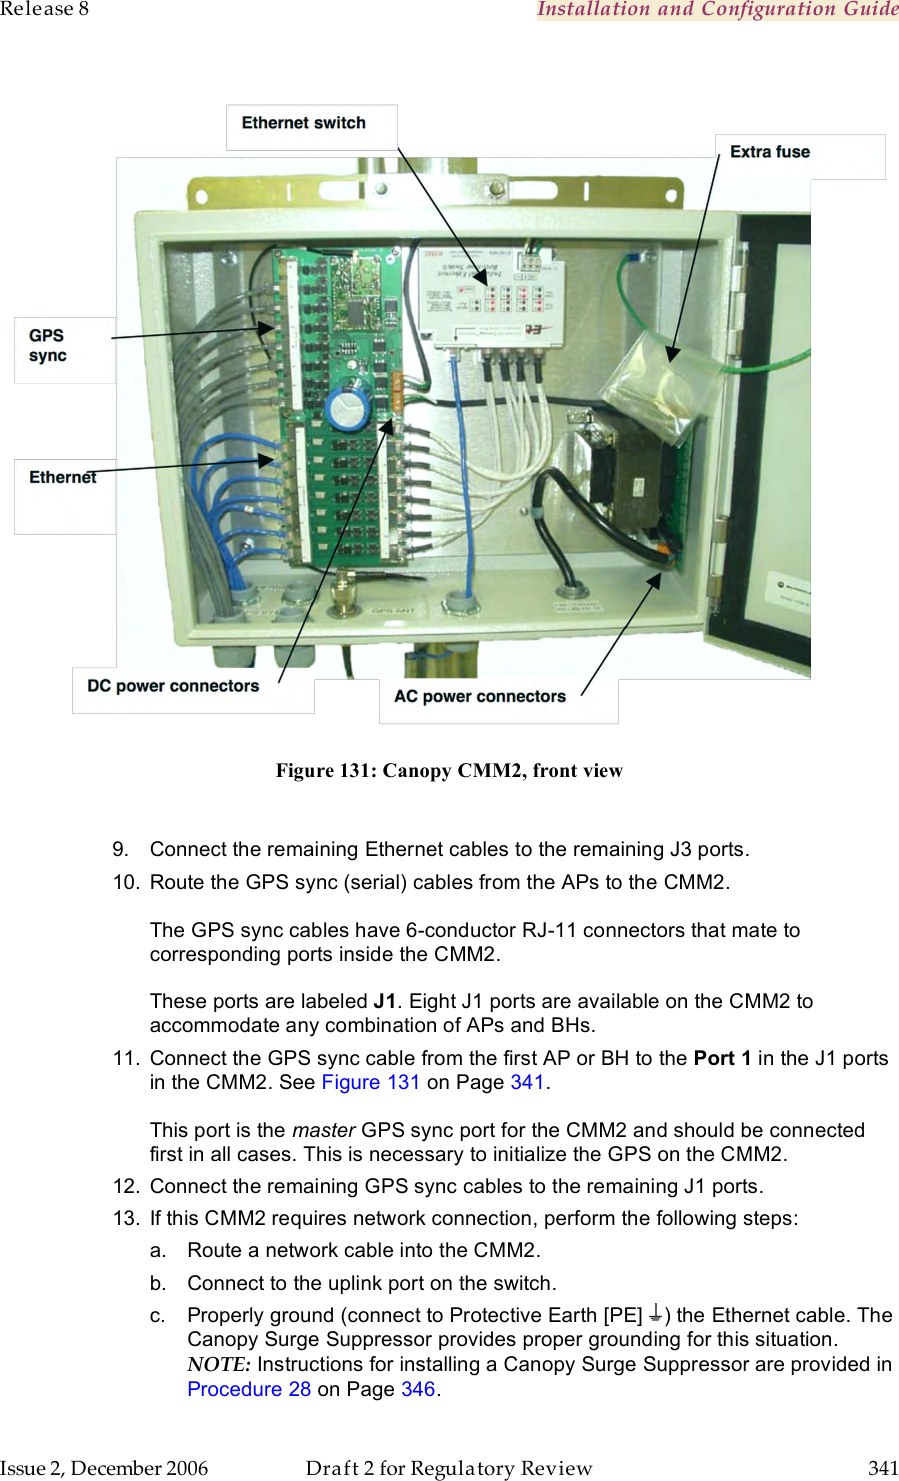 Release 8    Installation and Configuration Guide   Issue 2, December 2006  Draft 2 for Regulatory Review  341      Figure 131: Canopy CMM2, front view  9.  Connect the remaining Ethernet cables to the remaining J3 ports.  10.  Route the GPS sync (serial) cables from the APs to the CMM2.  The GPS sync cables have 6-conductor RJ-11 connectors that mate to corresponding ports inside the CMM2.   These ports are labeled J1. Eight J1 ports are available on the CMM2 to accommodate any combination of APs and BHs. 11.  Connect the GPS sync cable from the first AP or BH to the Port 1 in the J1 ports in the CMM2. See Figure 131 on Page 341.  This port is the master GPS sync port for the CMM2 and should be connected first in all cases. This is necessary to initialize the GPS on the CMM2. 12.  Connect the remaining GPS sync cables to the remaining J1 ports.  13.  If this CMM2 requires network connection, perform the following steps: a.  Route a network cable into the CMM2. b.  Connect to the uplink port on the switch. c.  Properly ground (connect to Protective Earth [PE]  ) the Ethernet cable. The Canopy Surge Suppressor provides proper grounding for this situation. NOTE: Instructions for installing a Canopy Surge Suppressor are provided in Procedure 28 on Page 346. 